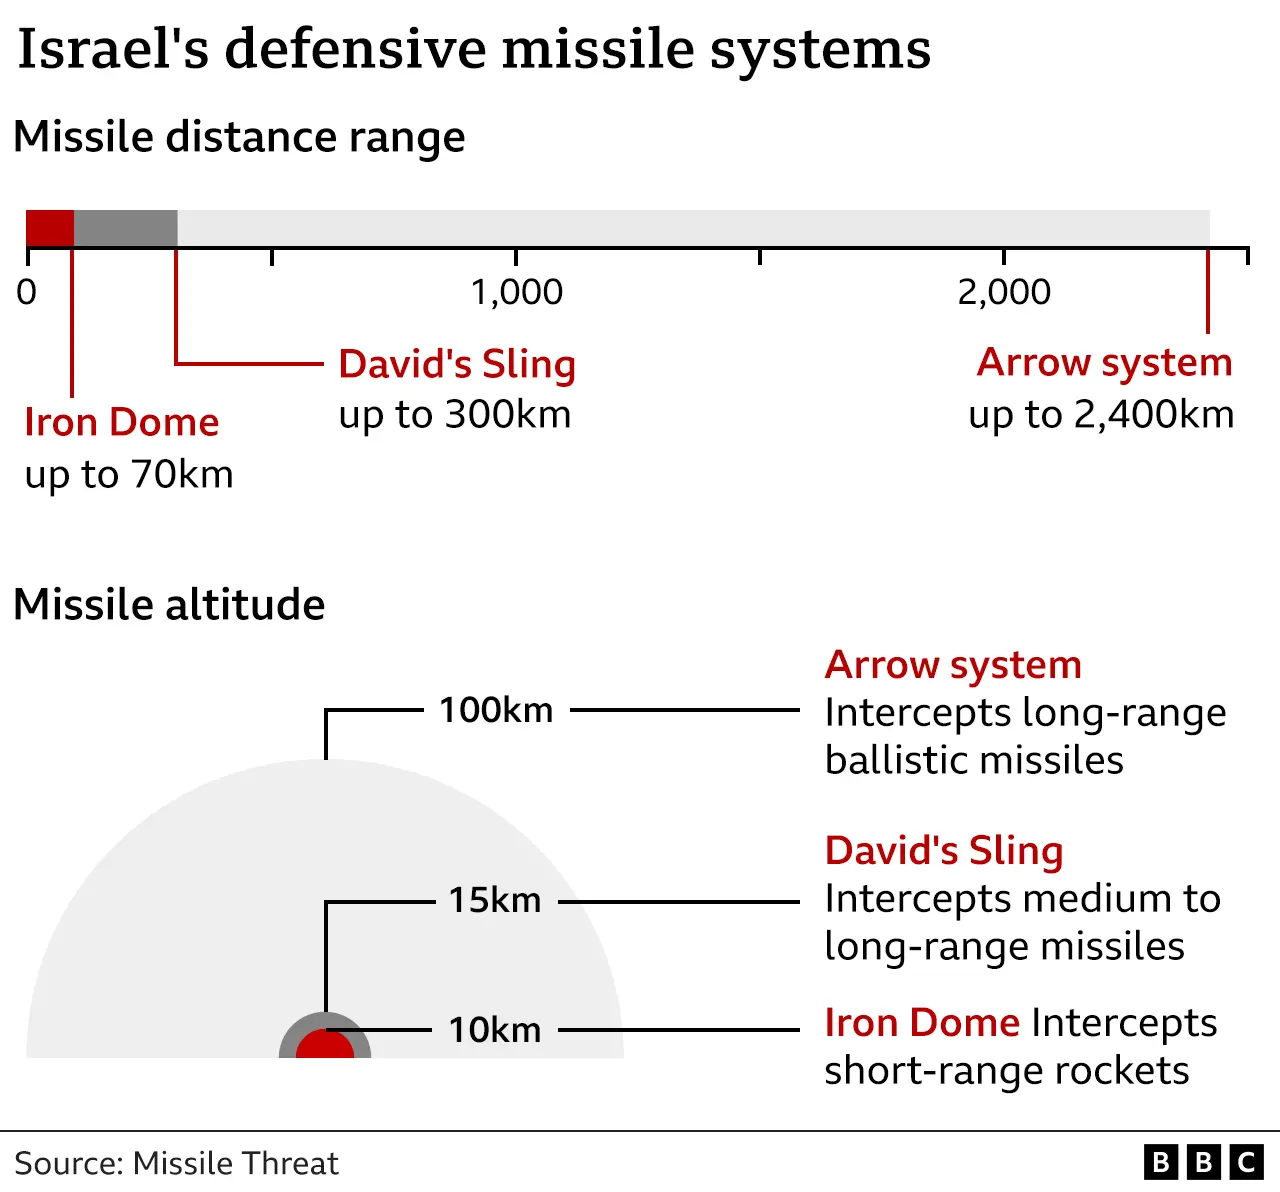 Graphic comparing the distance Israel's defensive missile systems can cover